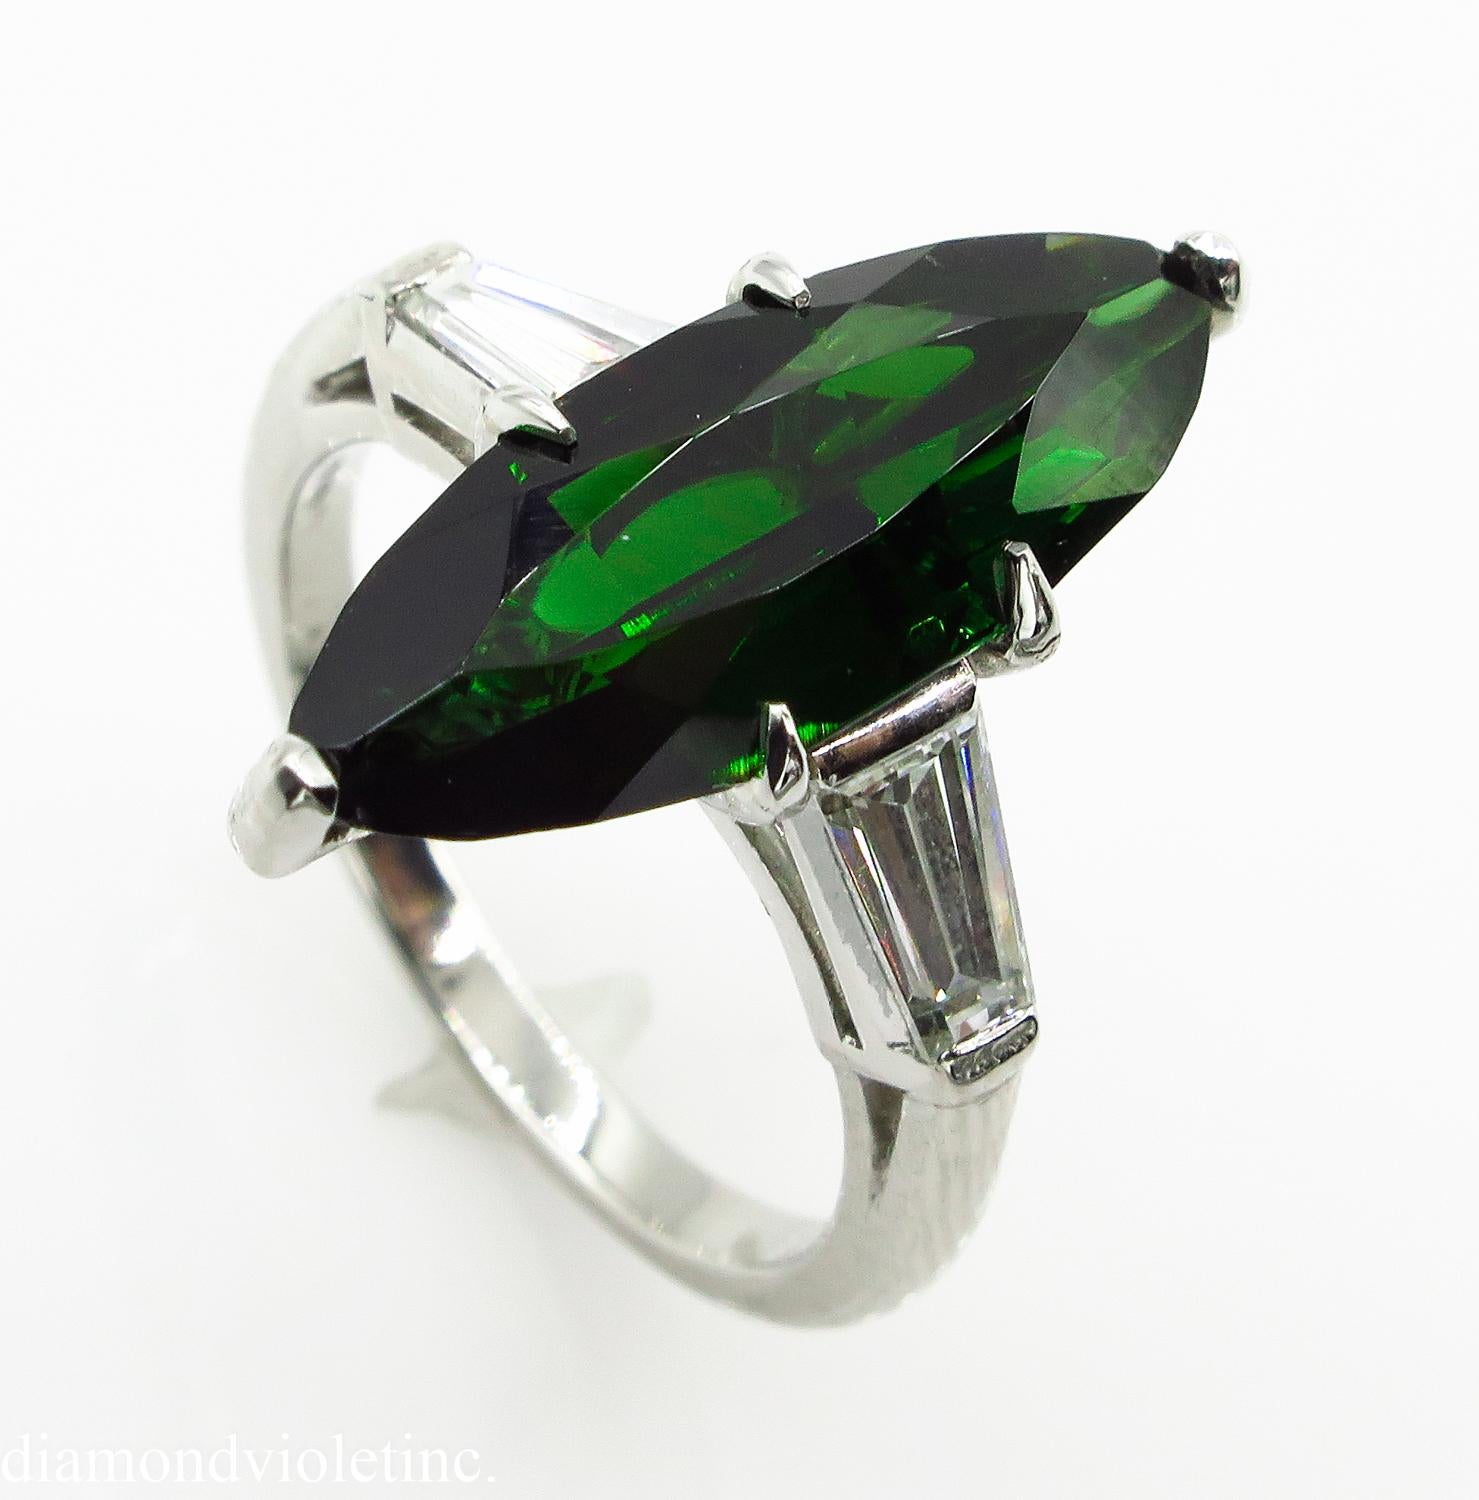 A Breathtaking Estate Vintage HANDMADE Platinum (stamped) Engagement ring dazzles GIA certified 3.10ct Marquise Shaped NATURAL Green Tourmaline; with measurements of 18.43x7.14x3.83mm. GIA report # 6197324861.
It is set with 2 Step cut Tapered